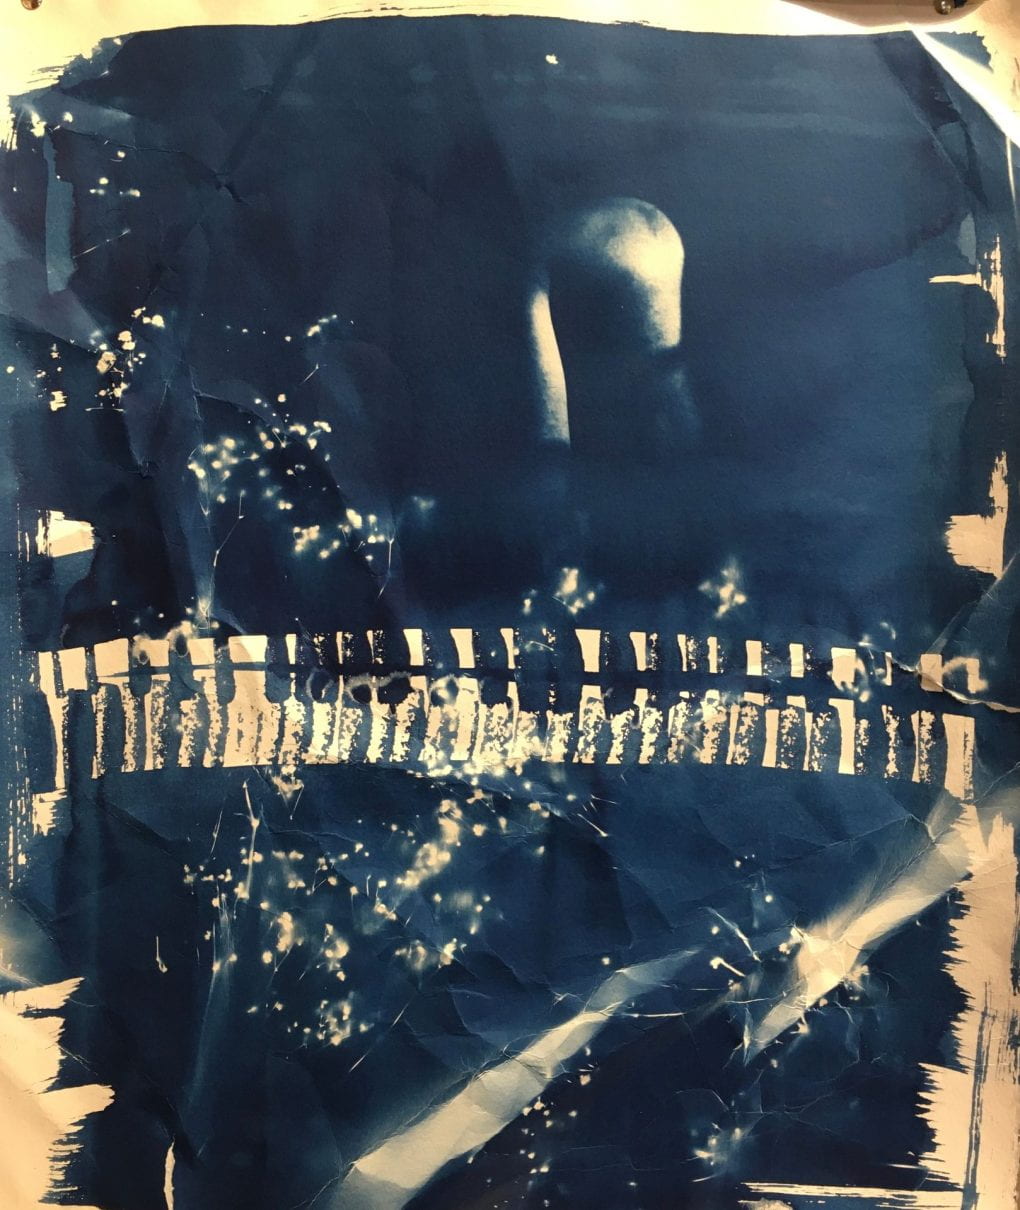 In dark blue cyanotype, an abstract collage piece with a shadowed out figure's shoulder and a streak of piano keys across the page. The paper has been purposely crumbled then re-flattened